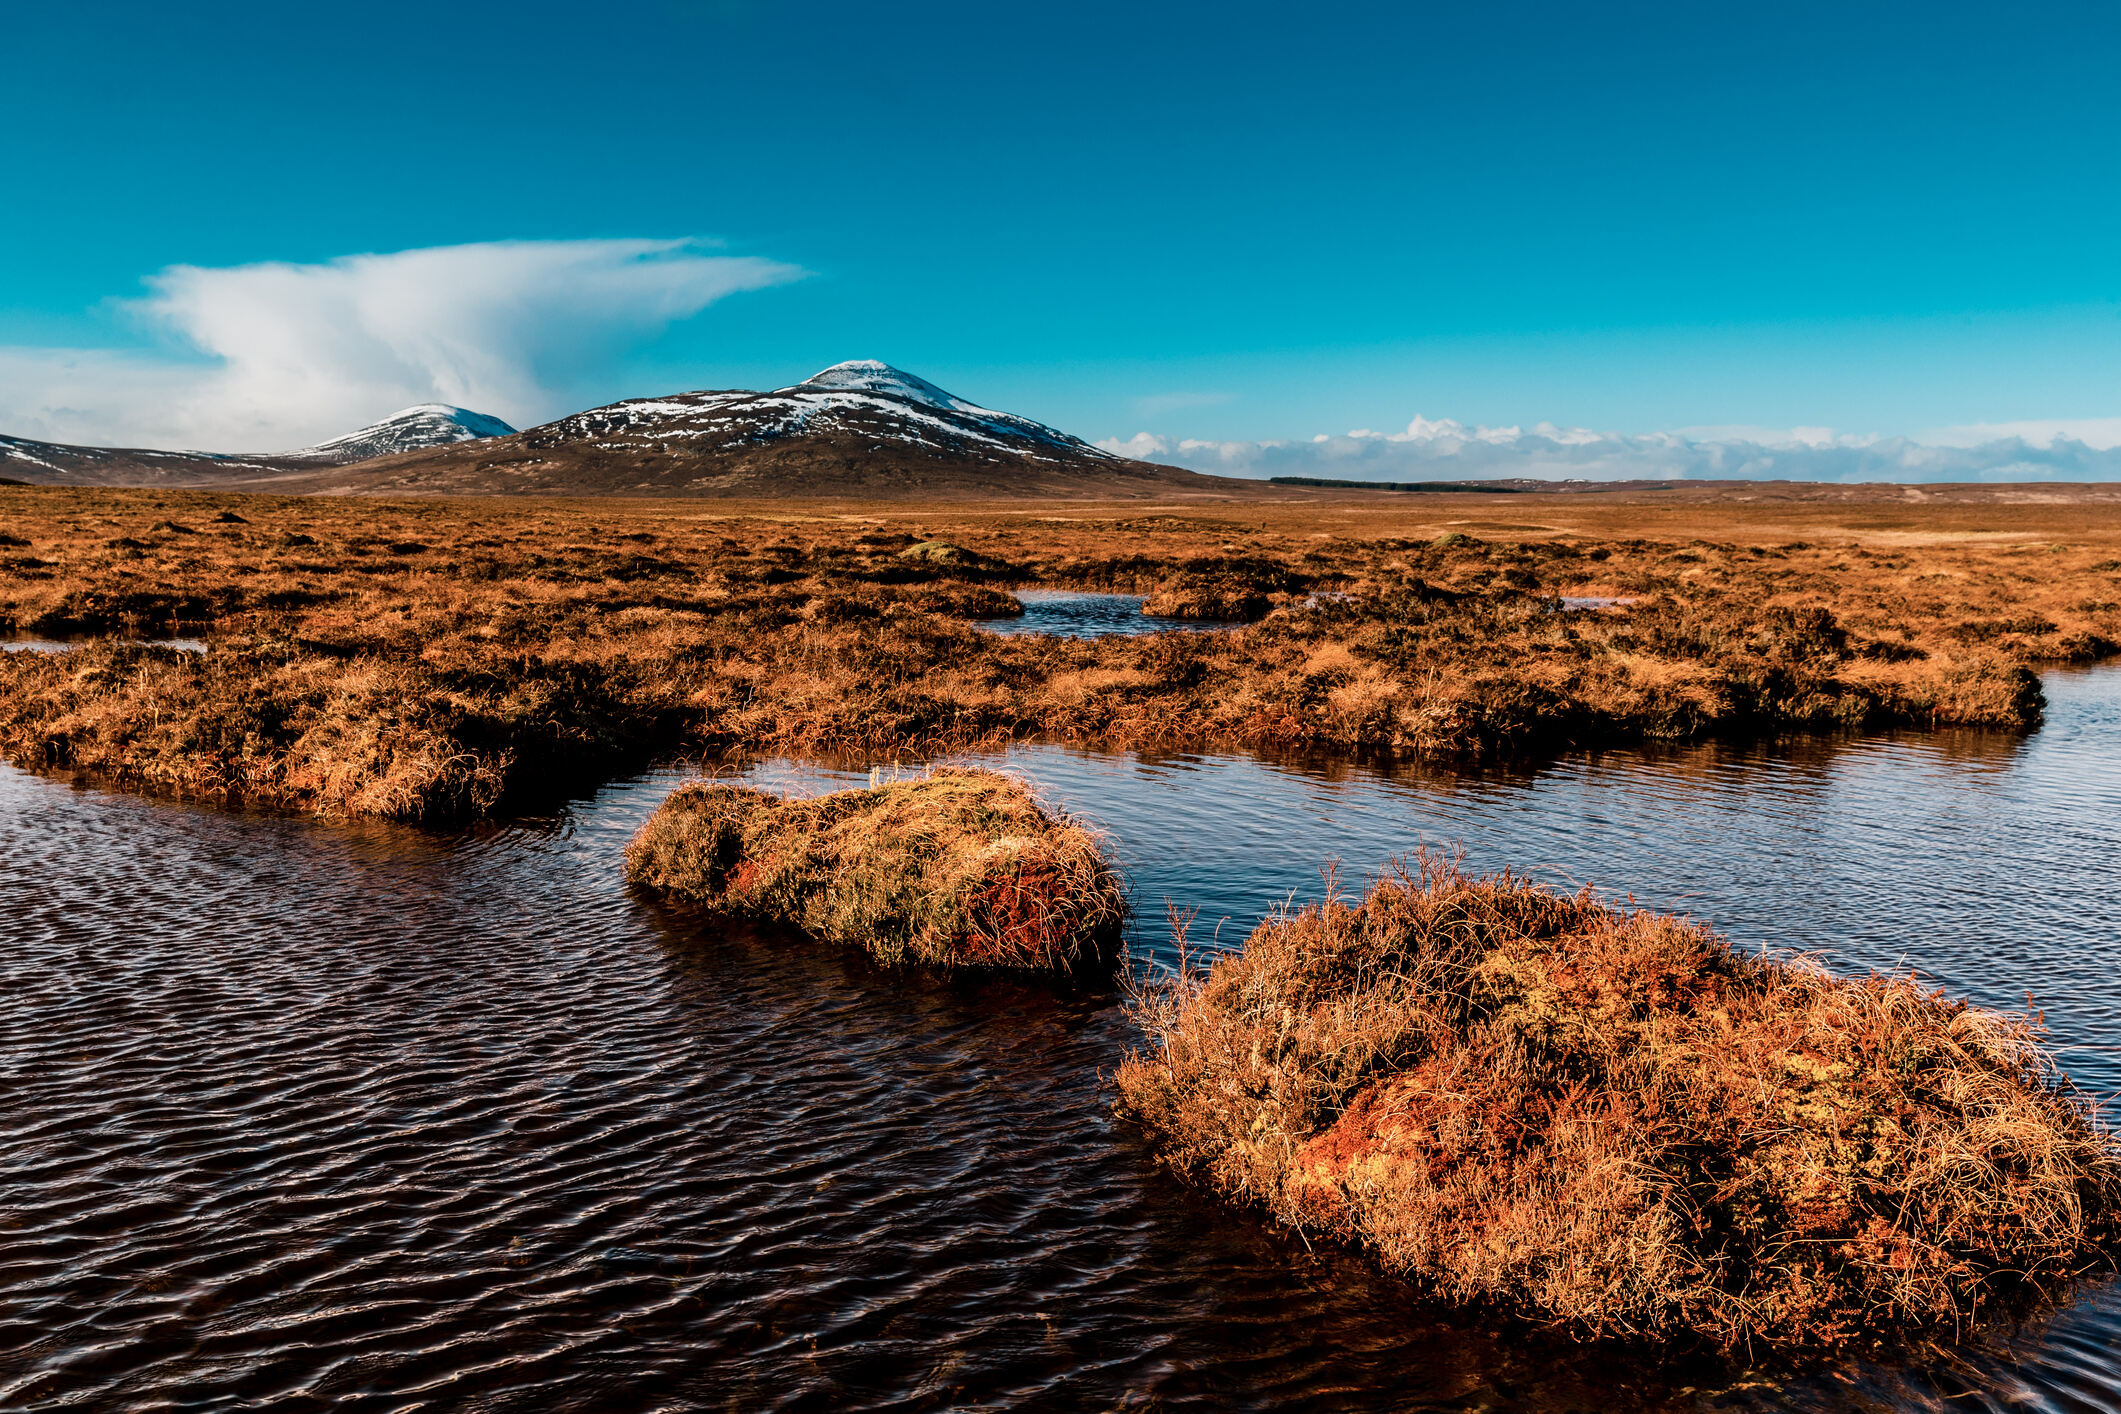 View over the peat bogs towards Ben Griam Beag, at Forsinard, in the Flow Country of the Sutherland region of Scotland.